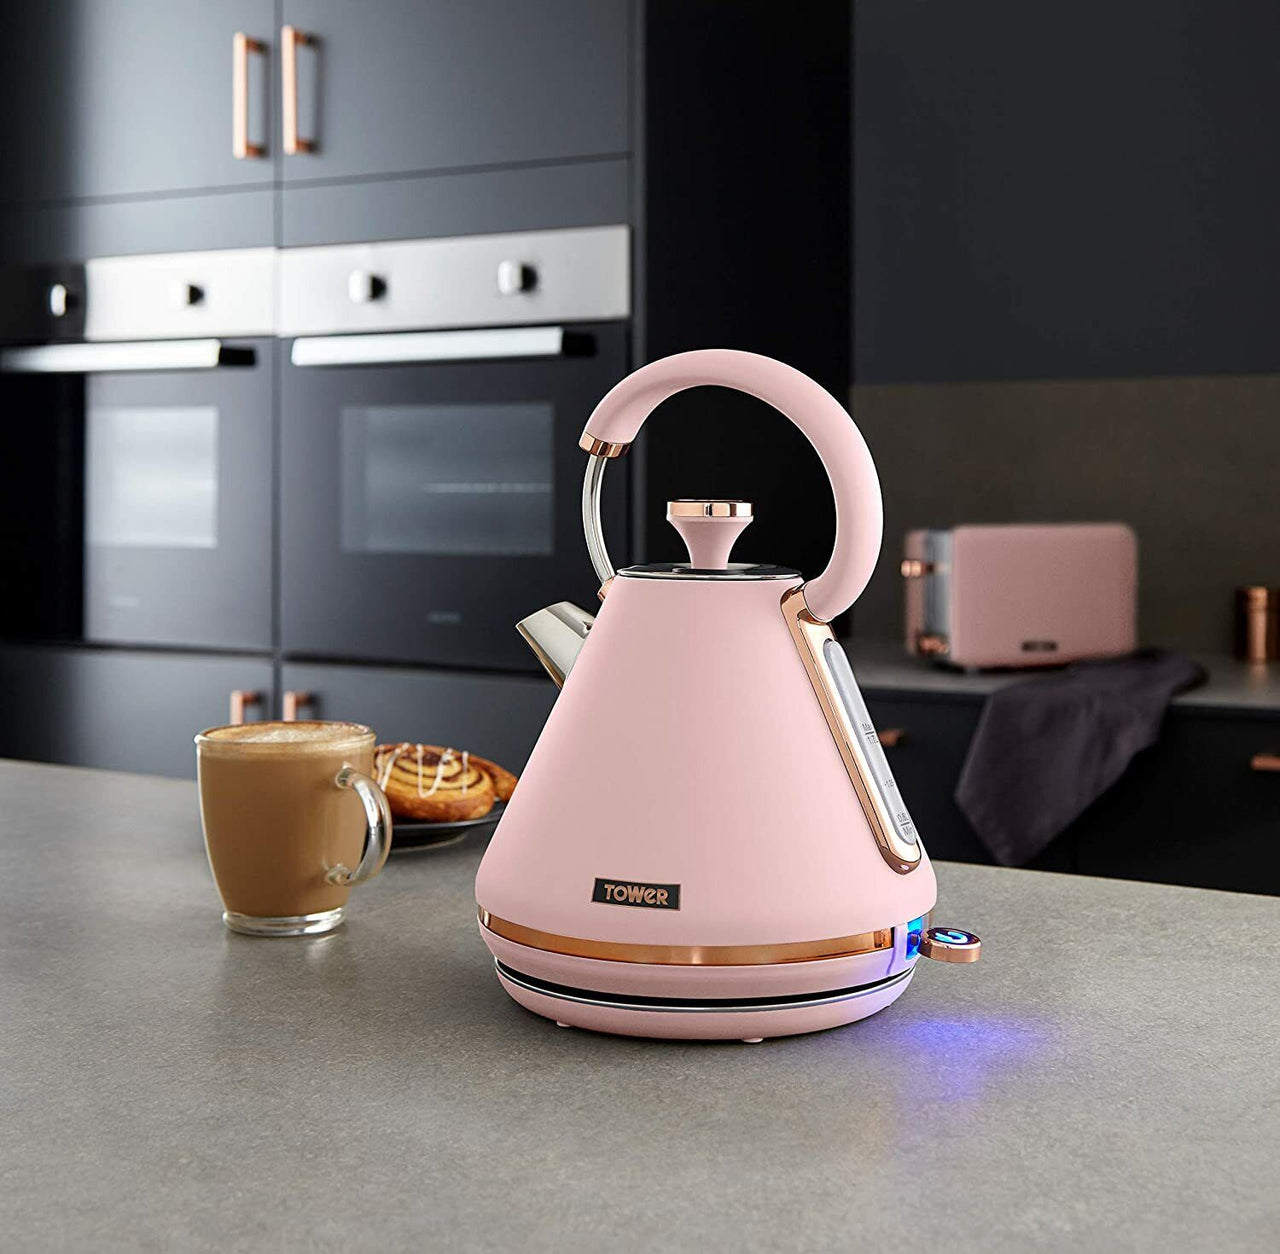 Tower Cavaletto Pink 1.7L 3KW Pyramid Kettle, 2 Slice Toaster & Canisters Matching Kitchen Set